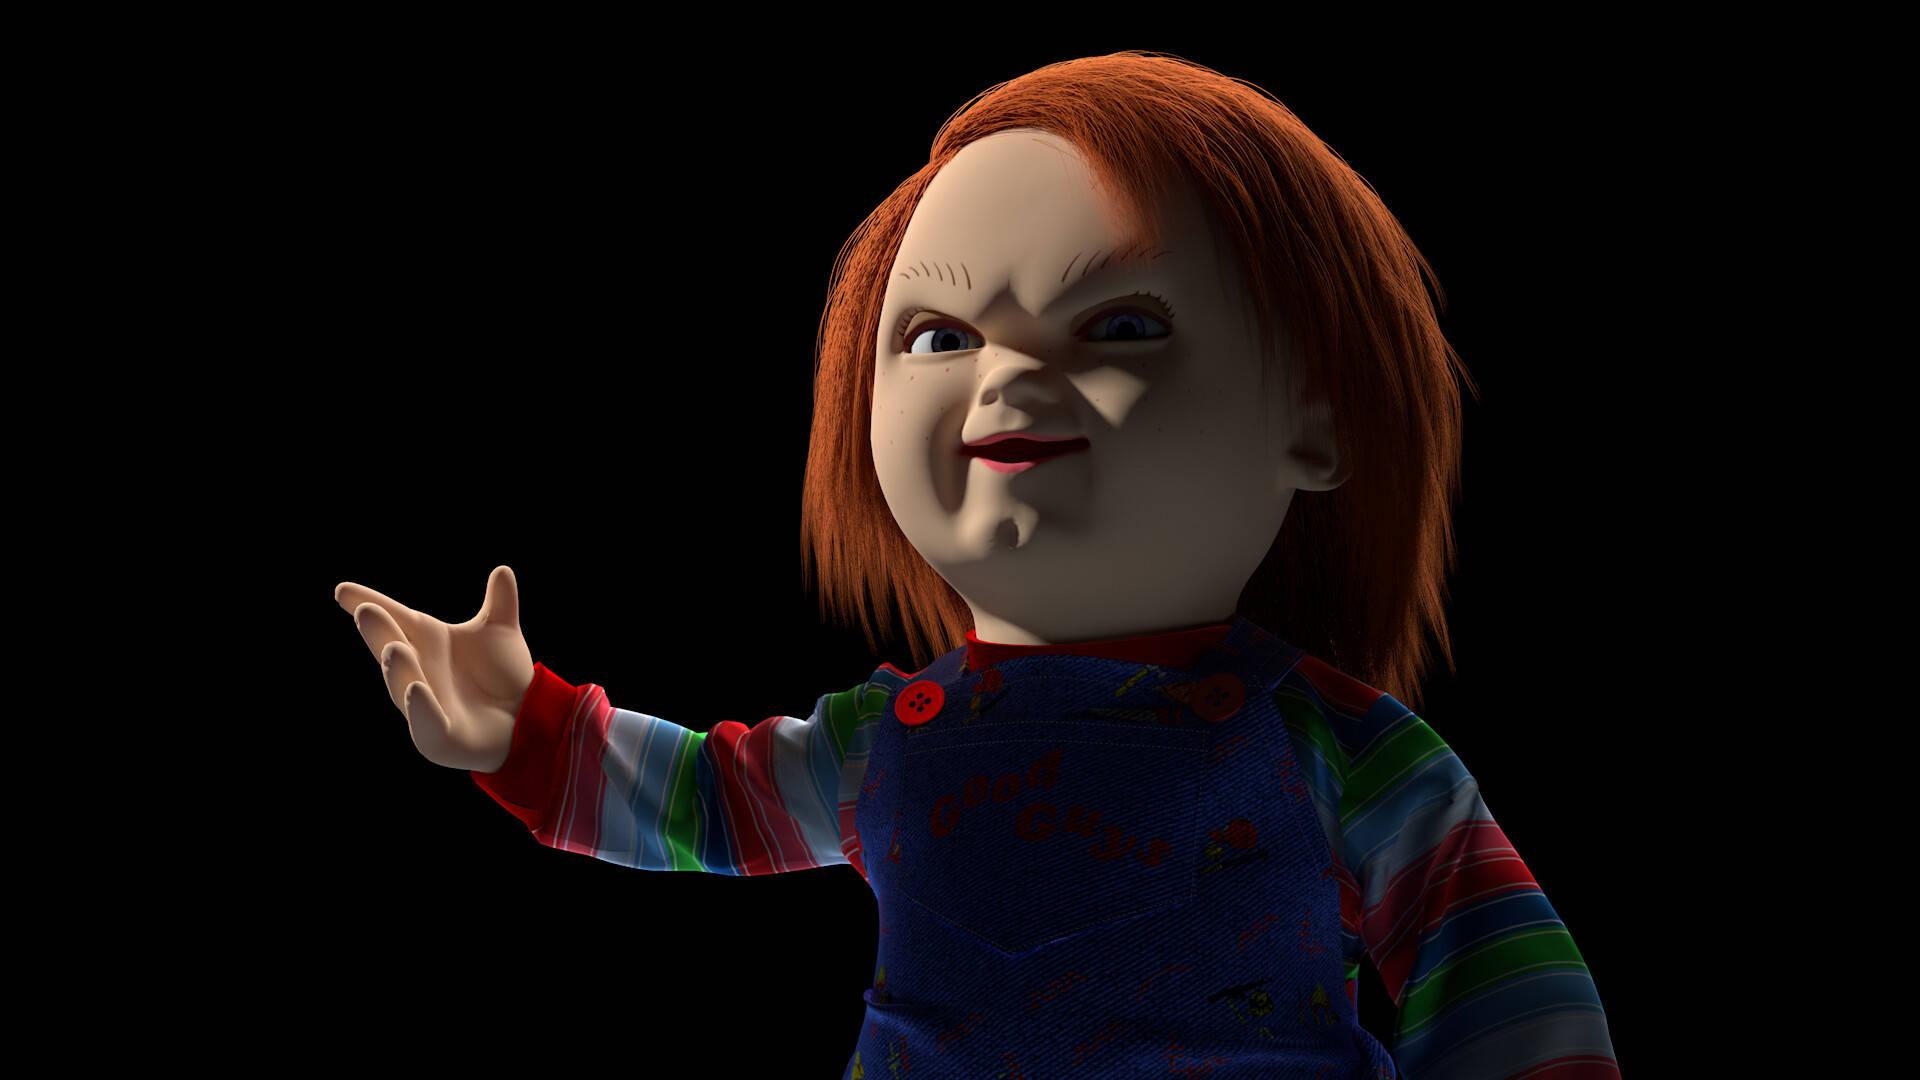 Child's Play 3d Chucky Background